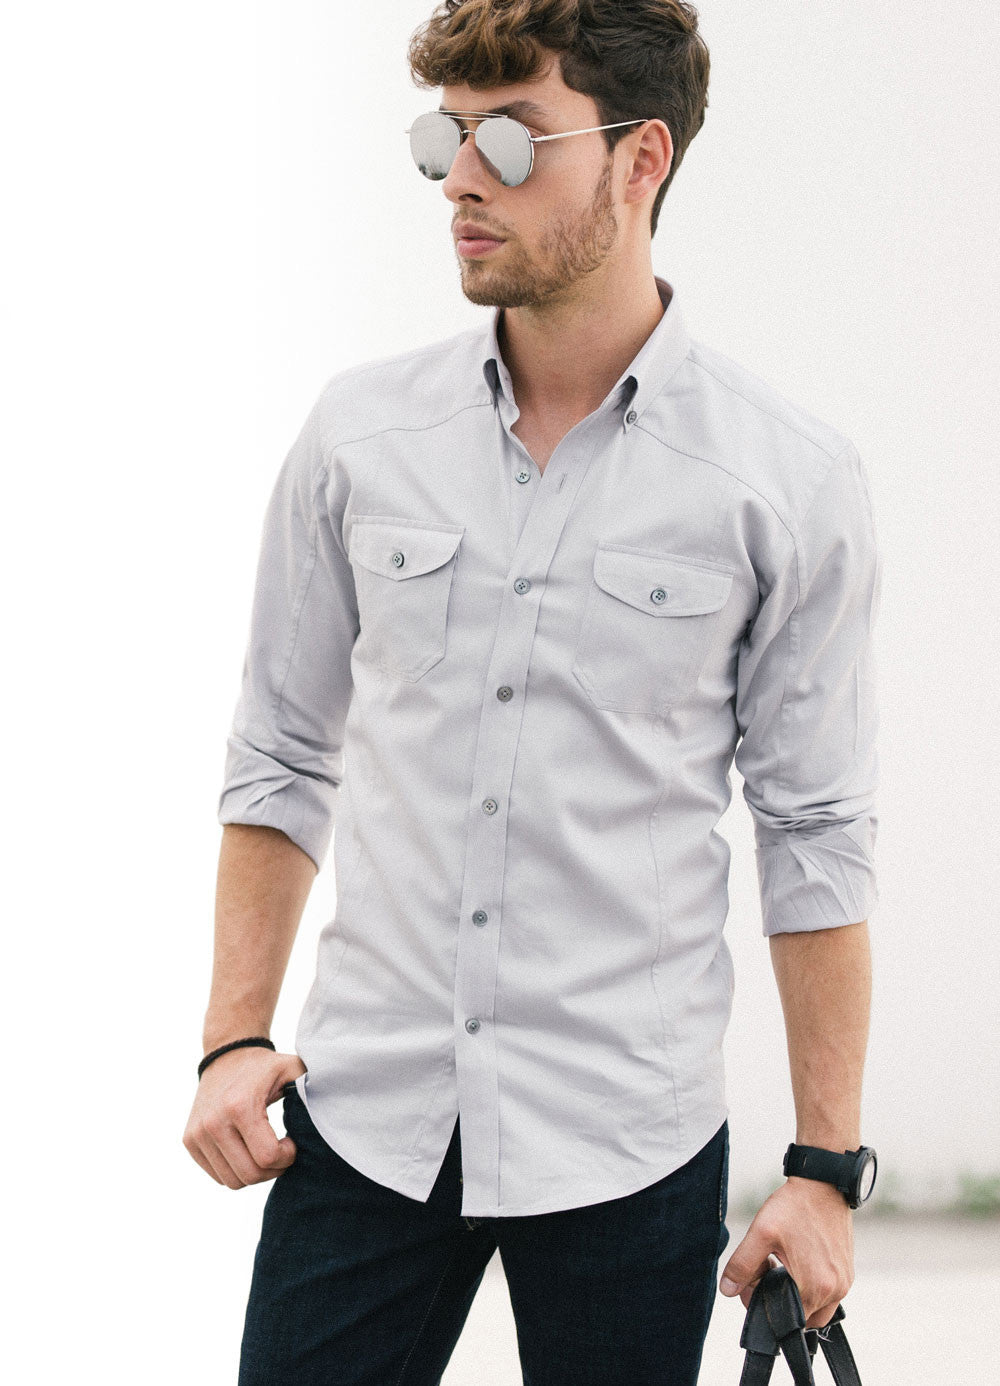 Grey Utility Shirt Rolled Sleeves